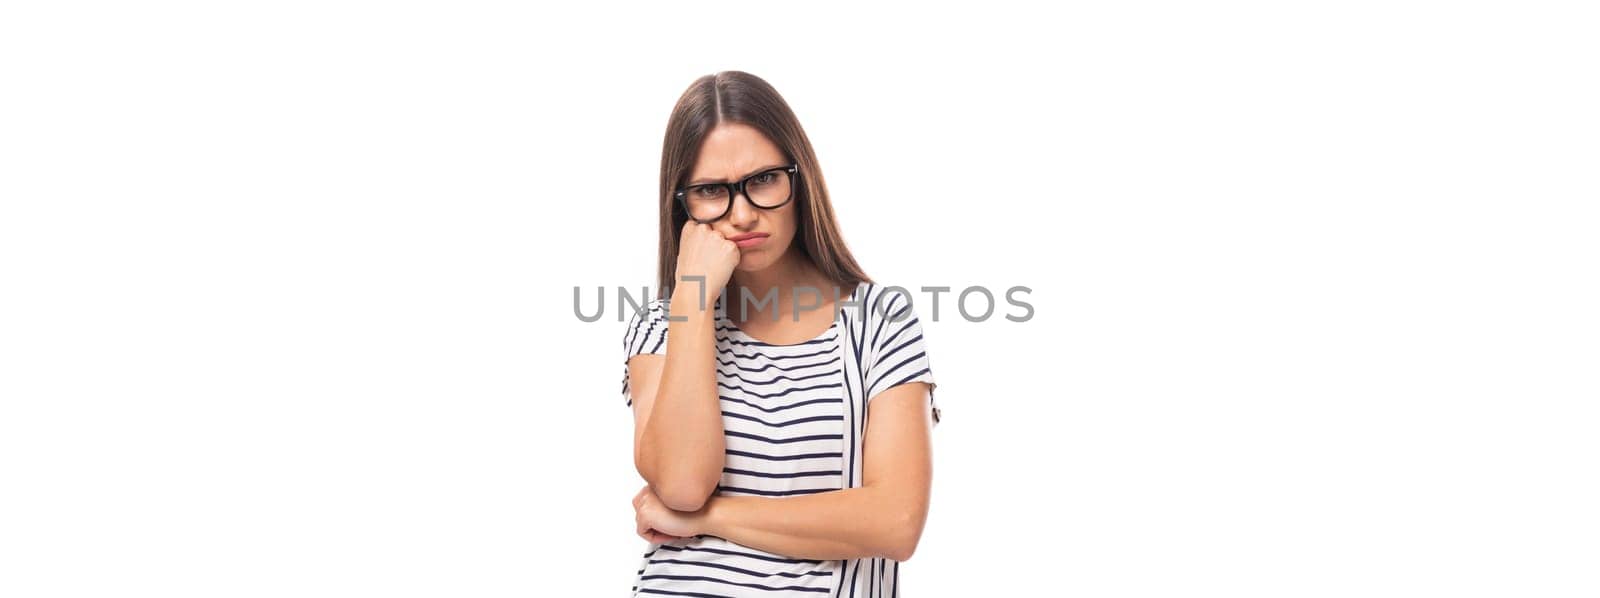 portrait of a young cute casual european woman with long dark hair dressed in a striped t-shirt on a white background with copy space.